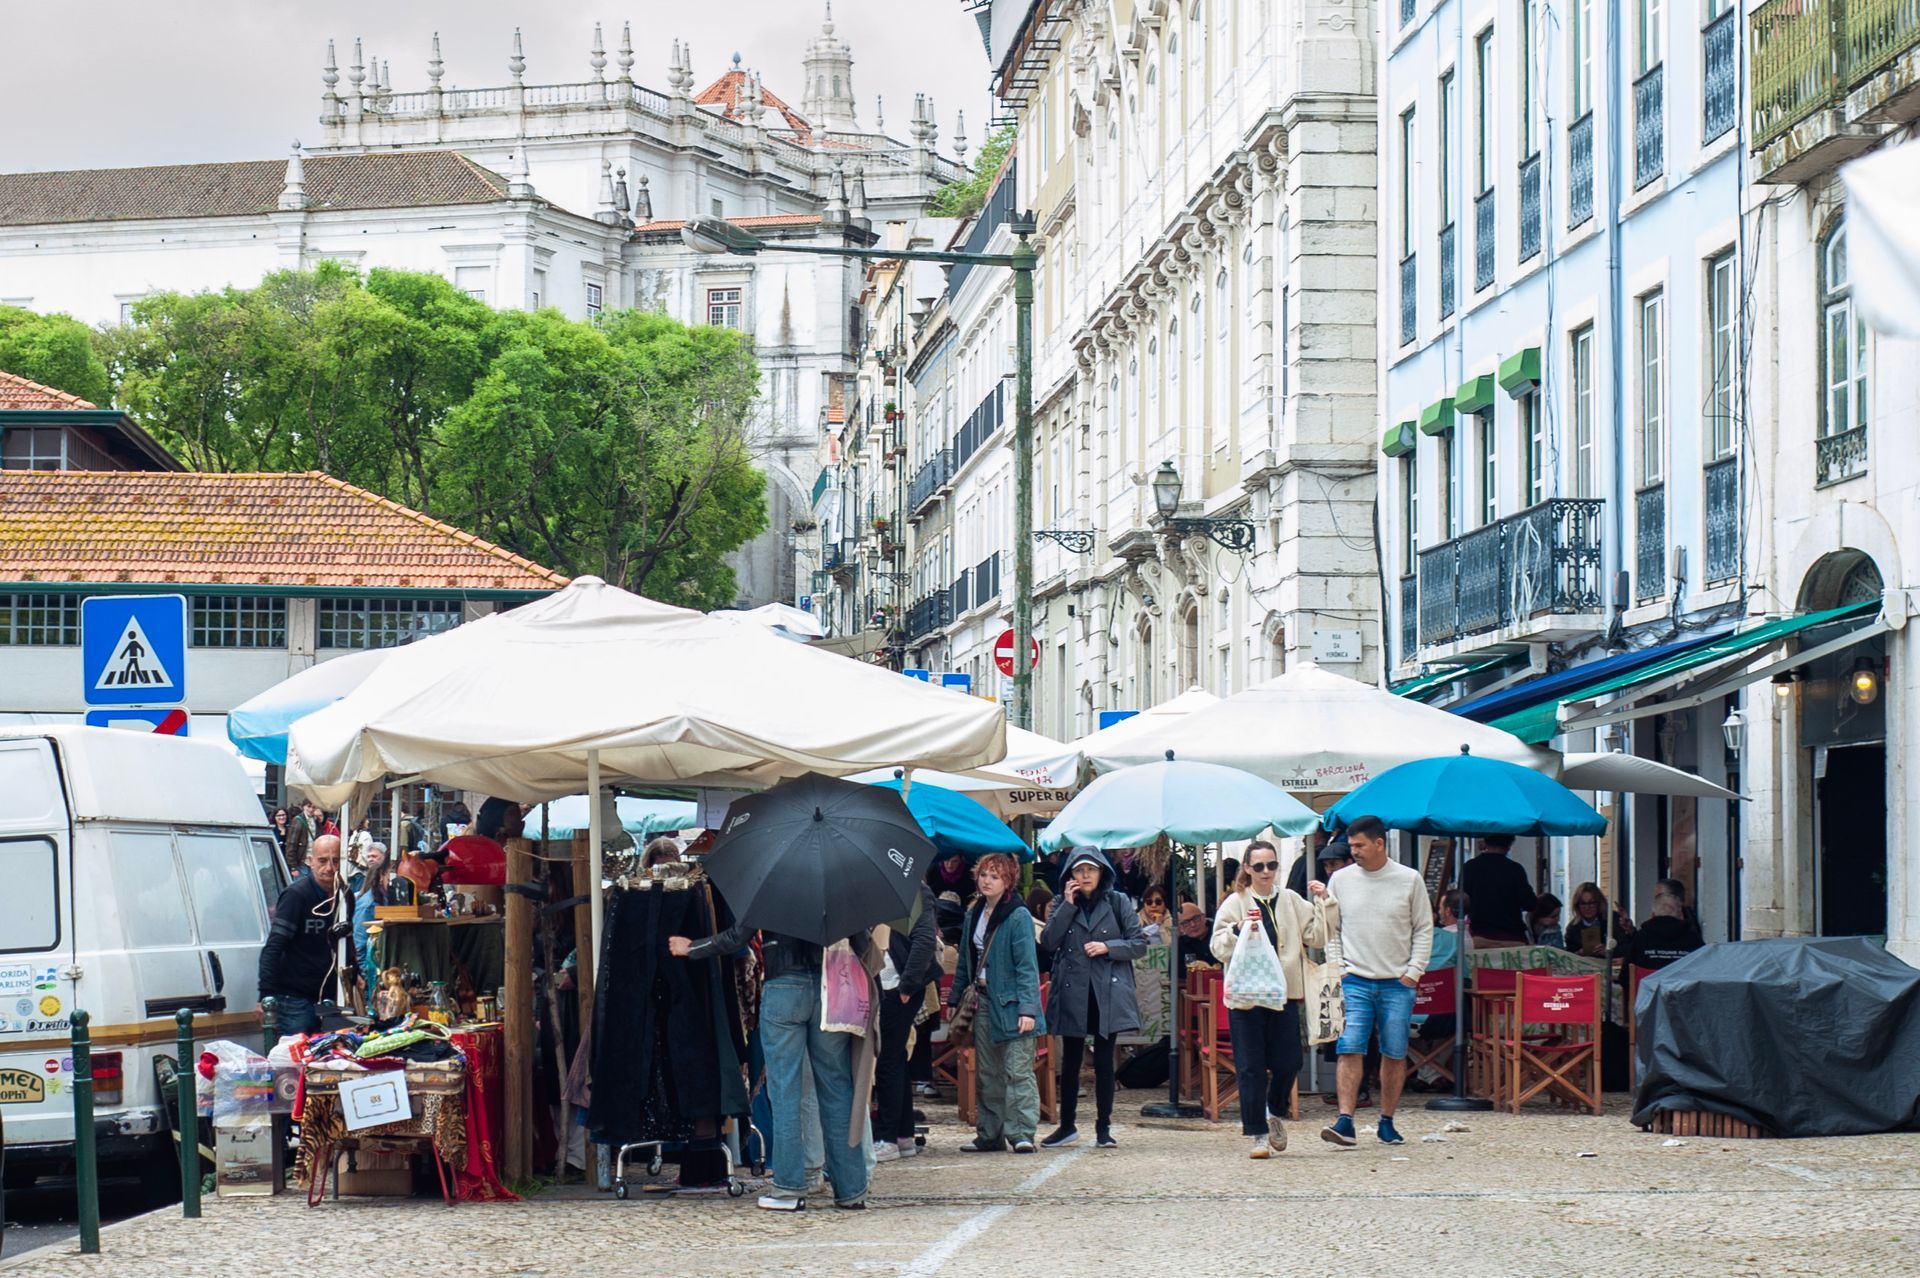 Discover the charm of Lisbon's rainy days with our guide!
